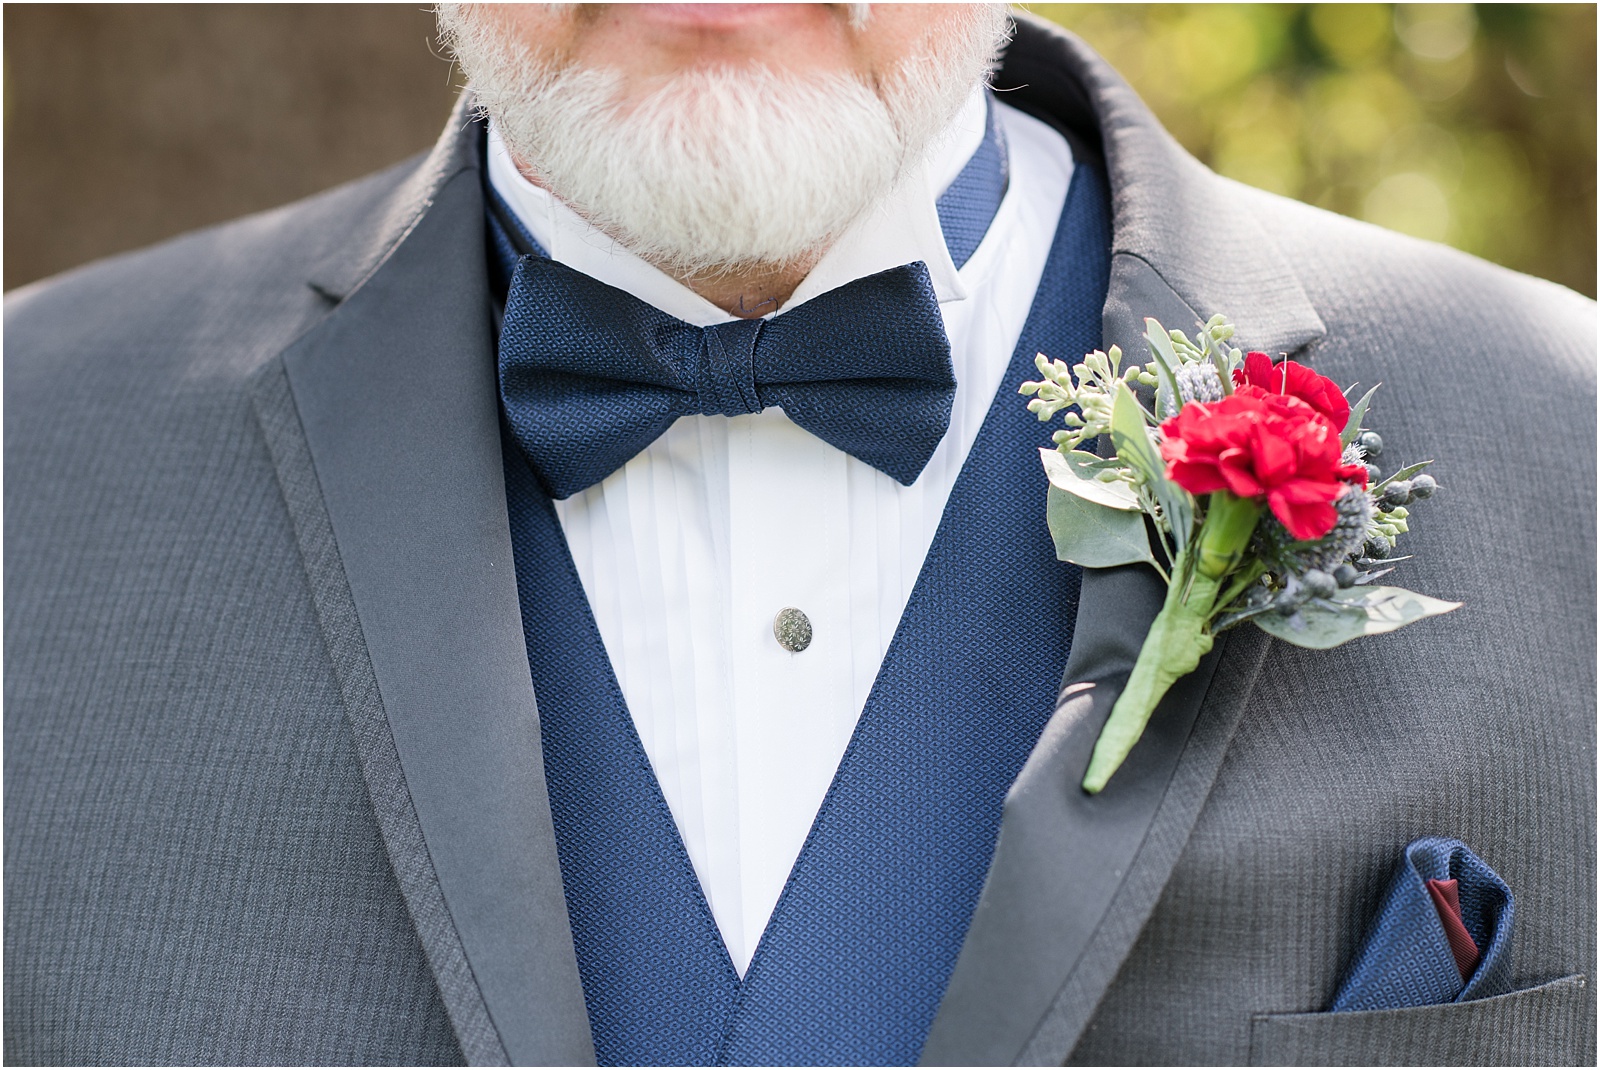 Michelle and Sara Photography, Michelle and Sara weddings, michelle robinson photography, burke manor inn, groom details, boutonniere, floral details for groom, red florals, fall boutonniere, navy and gray suit